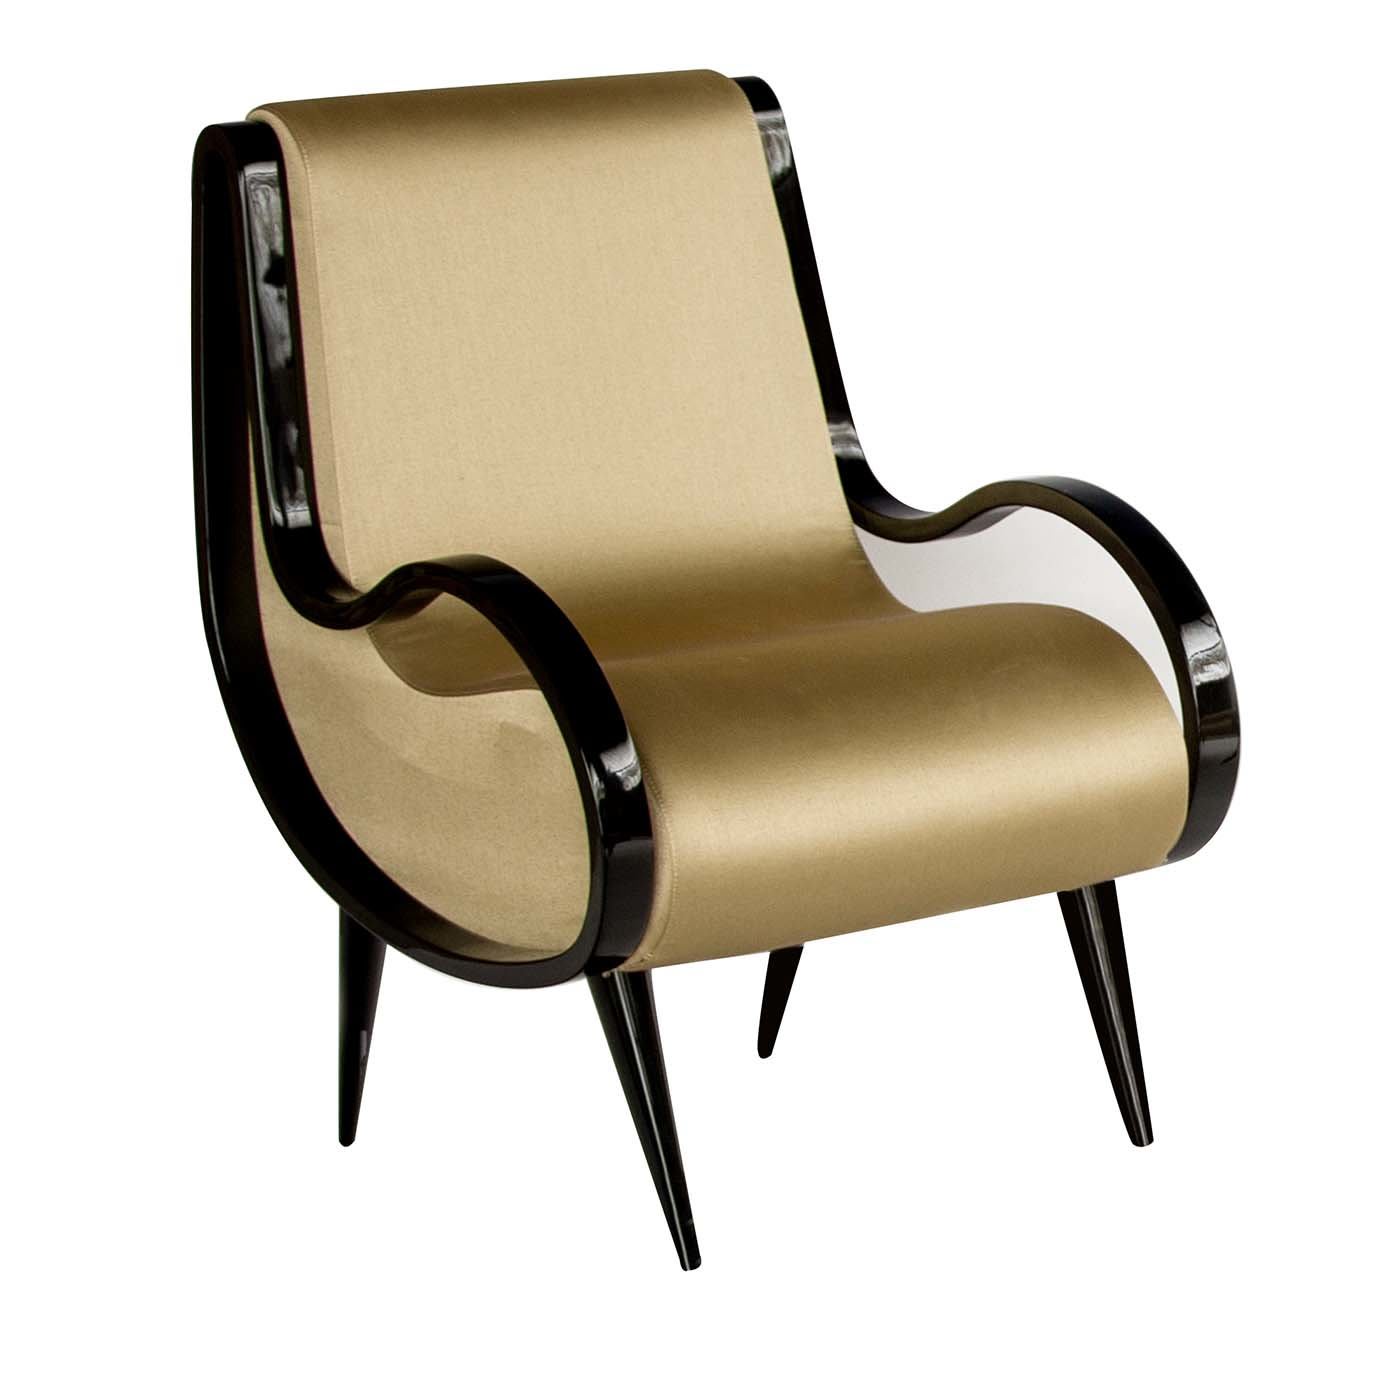 Eclipse armchair in gold fabric - Extroverso